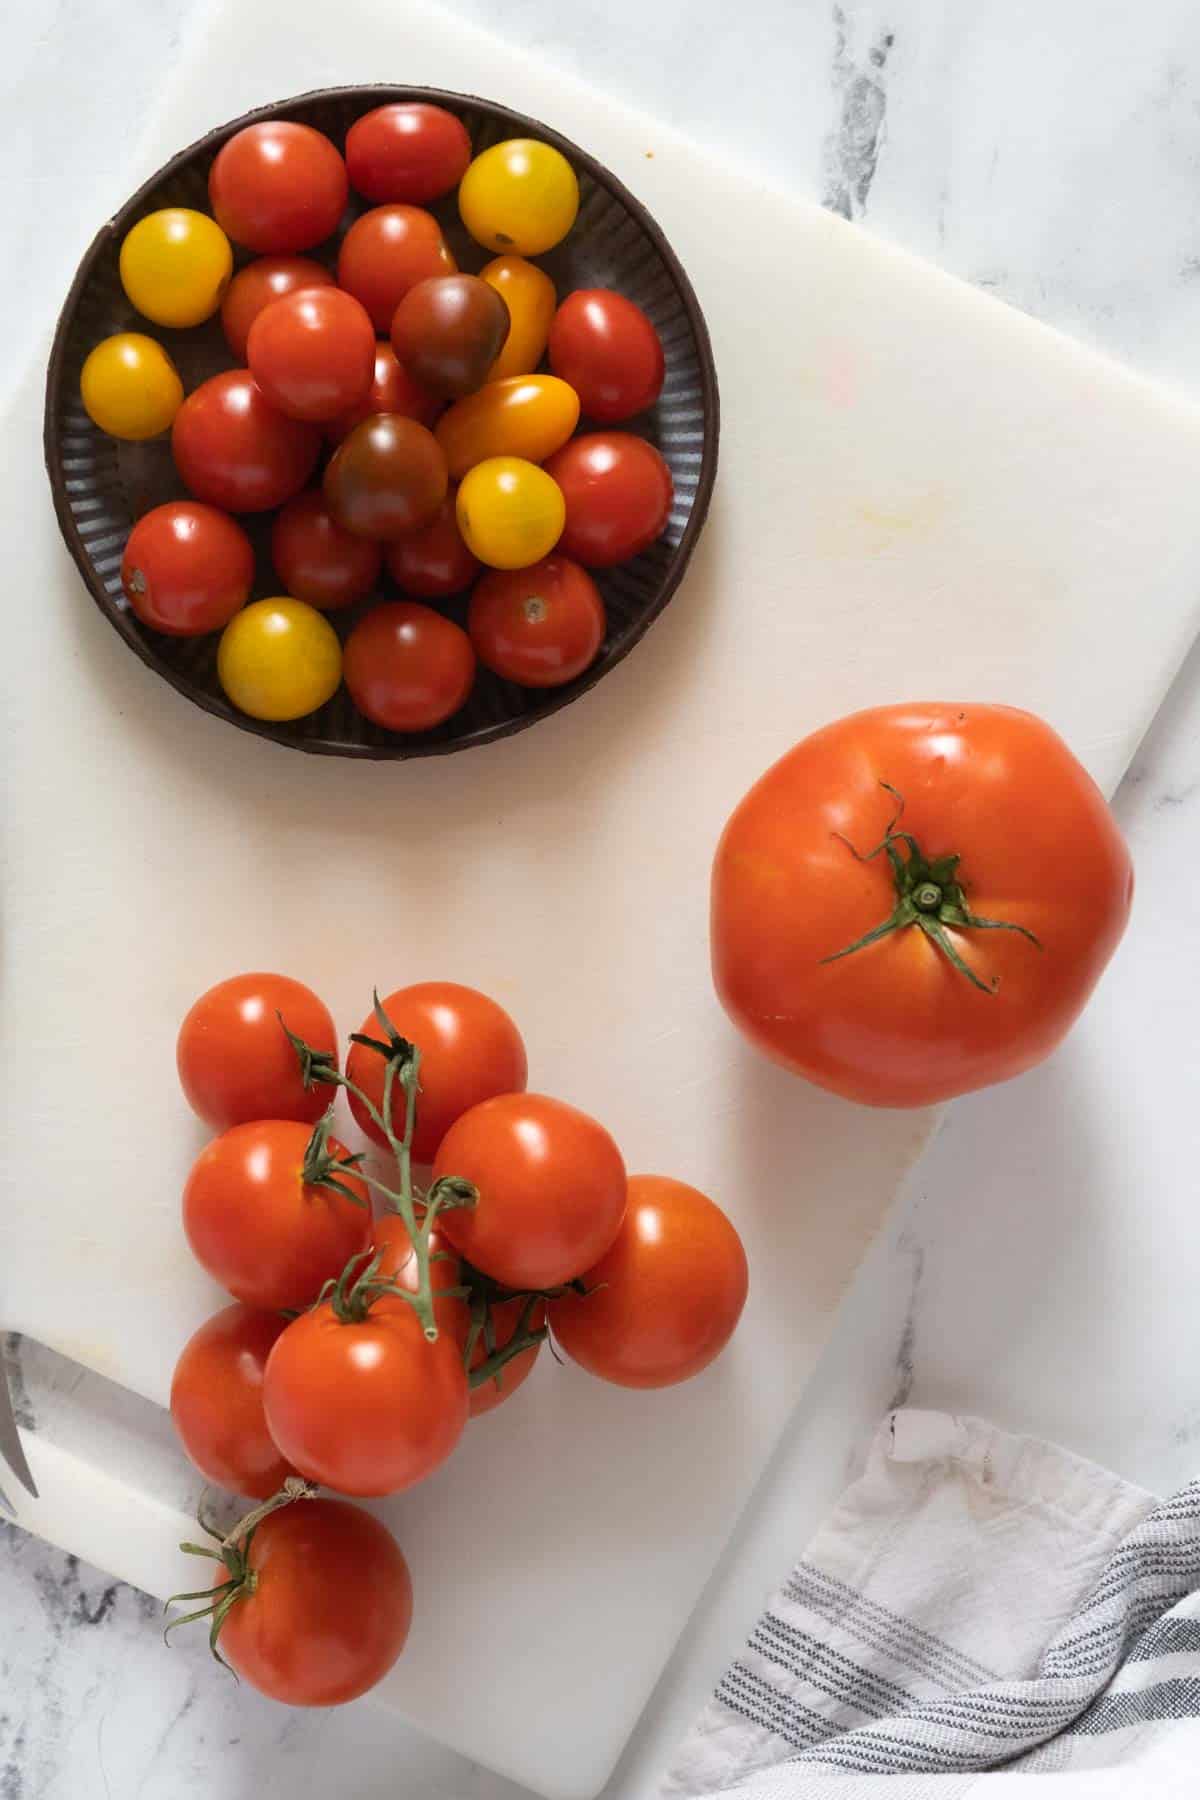 Different types of tomatoes on a cutting board.